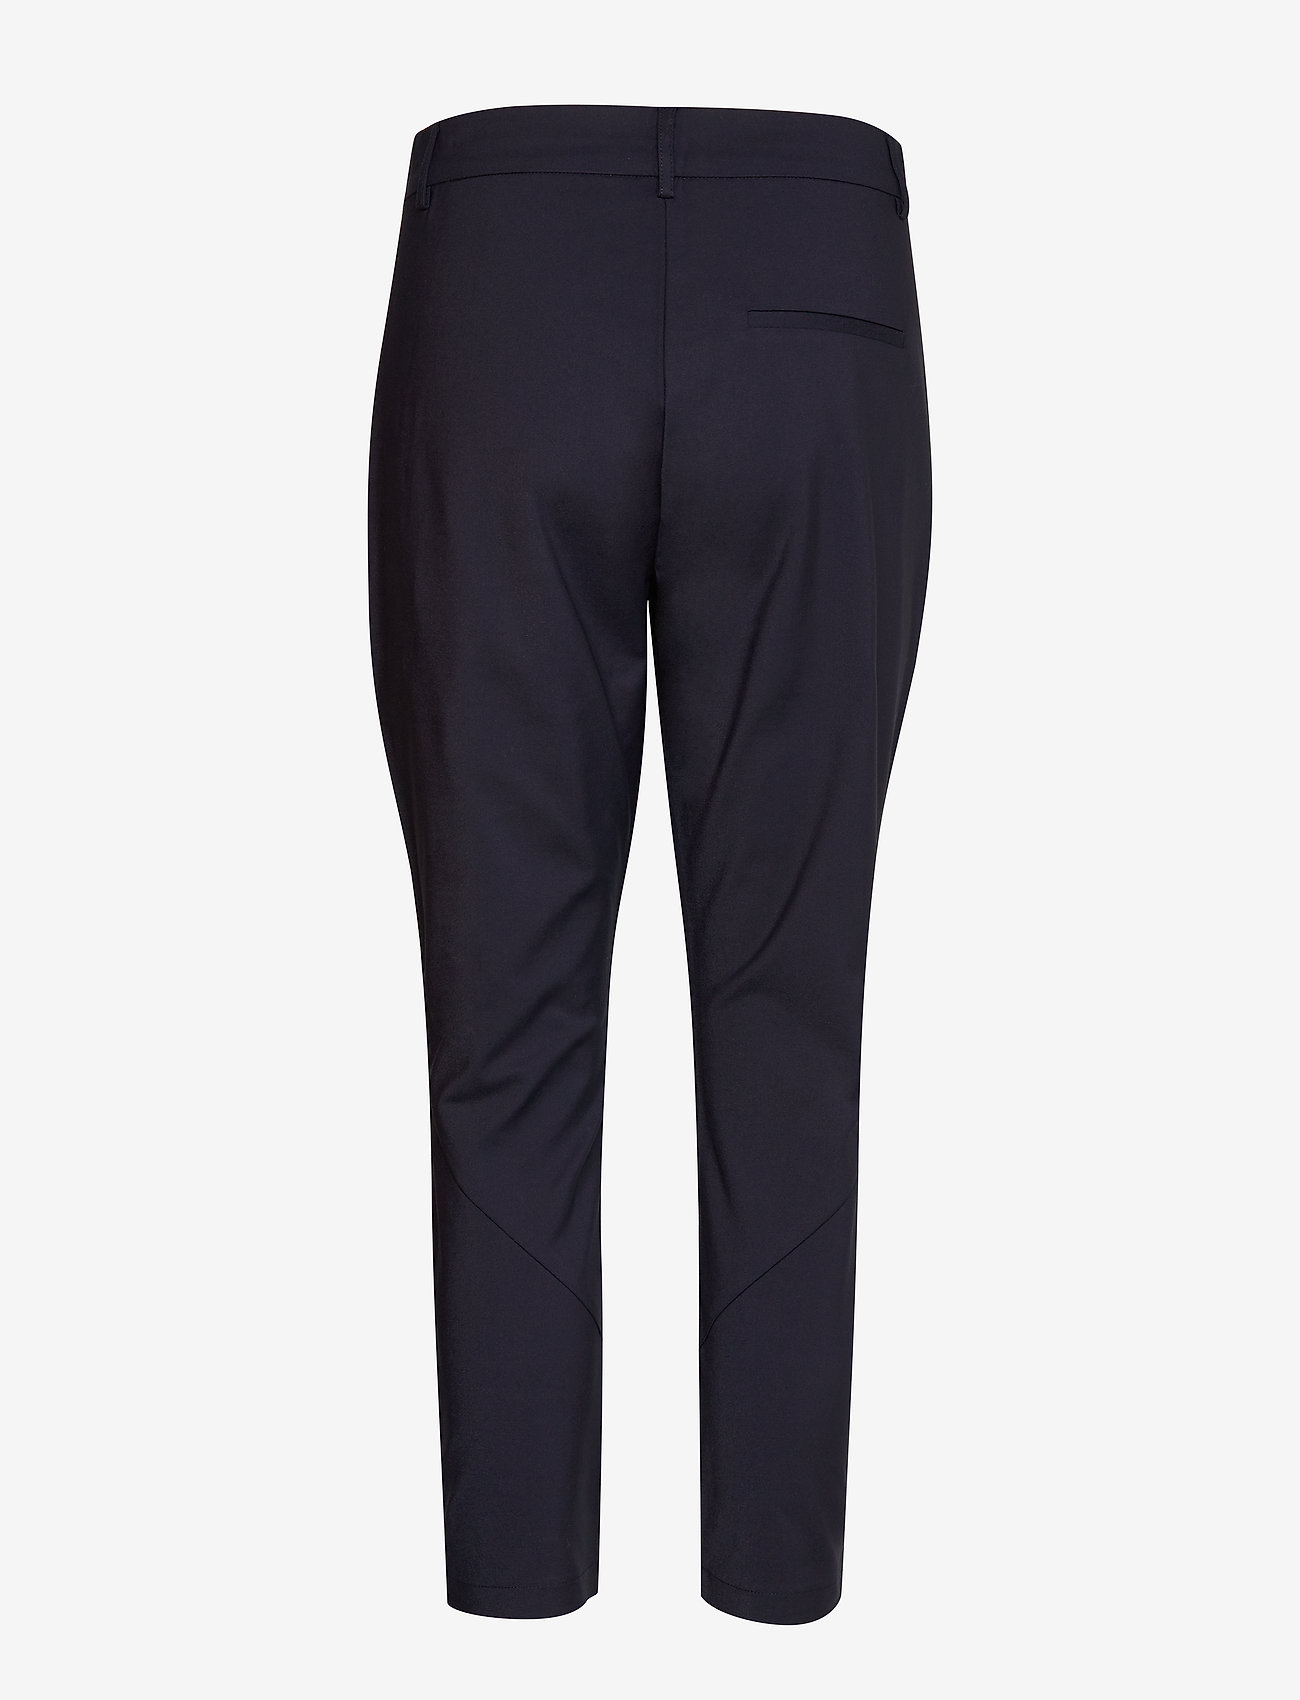 Coster Copenhagen - CC Heart tapered pants - slim fit trousers - night sky blue - 1